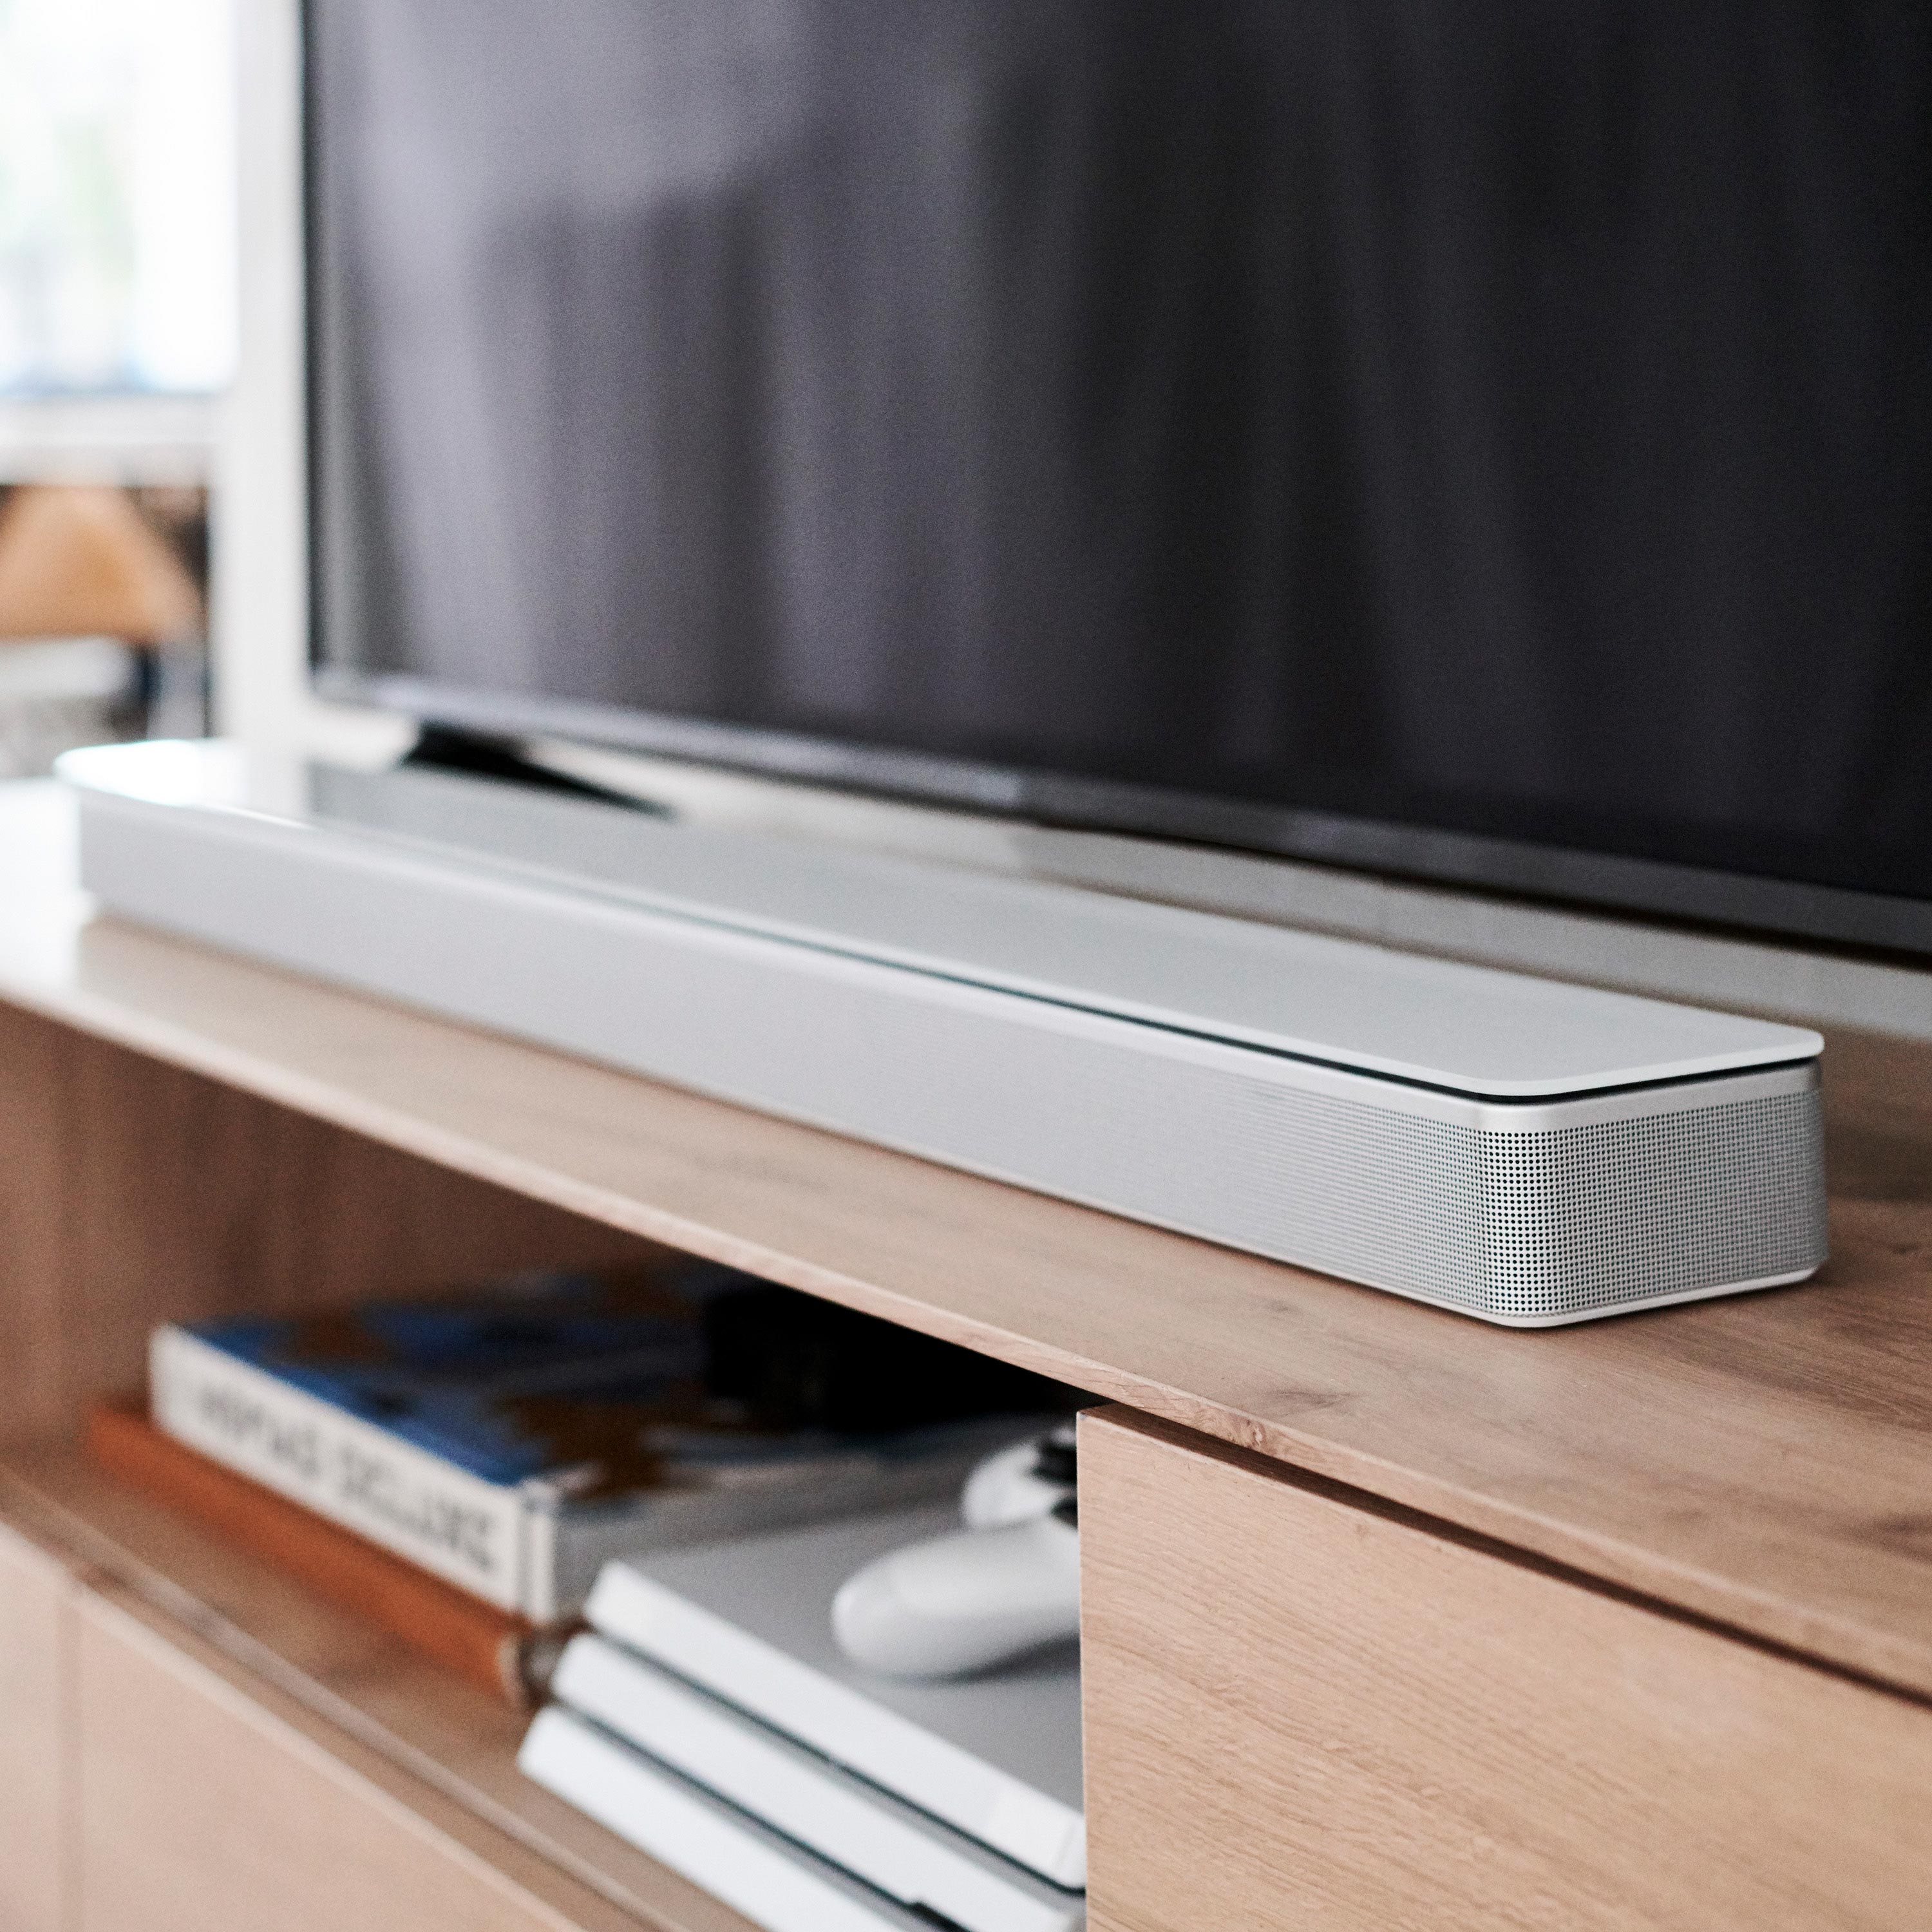 Product image of the Bose Souundbar 700 (white) from Bose press release. The soundbar sits ona wood TV stand with a TV above it.